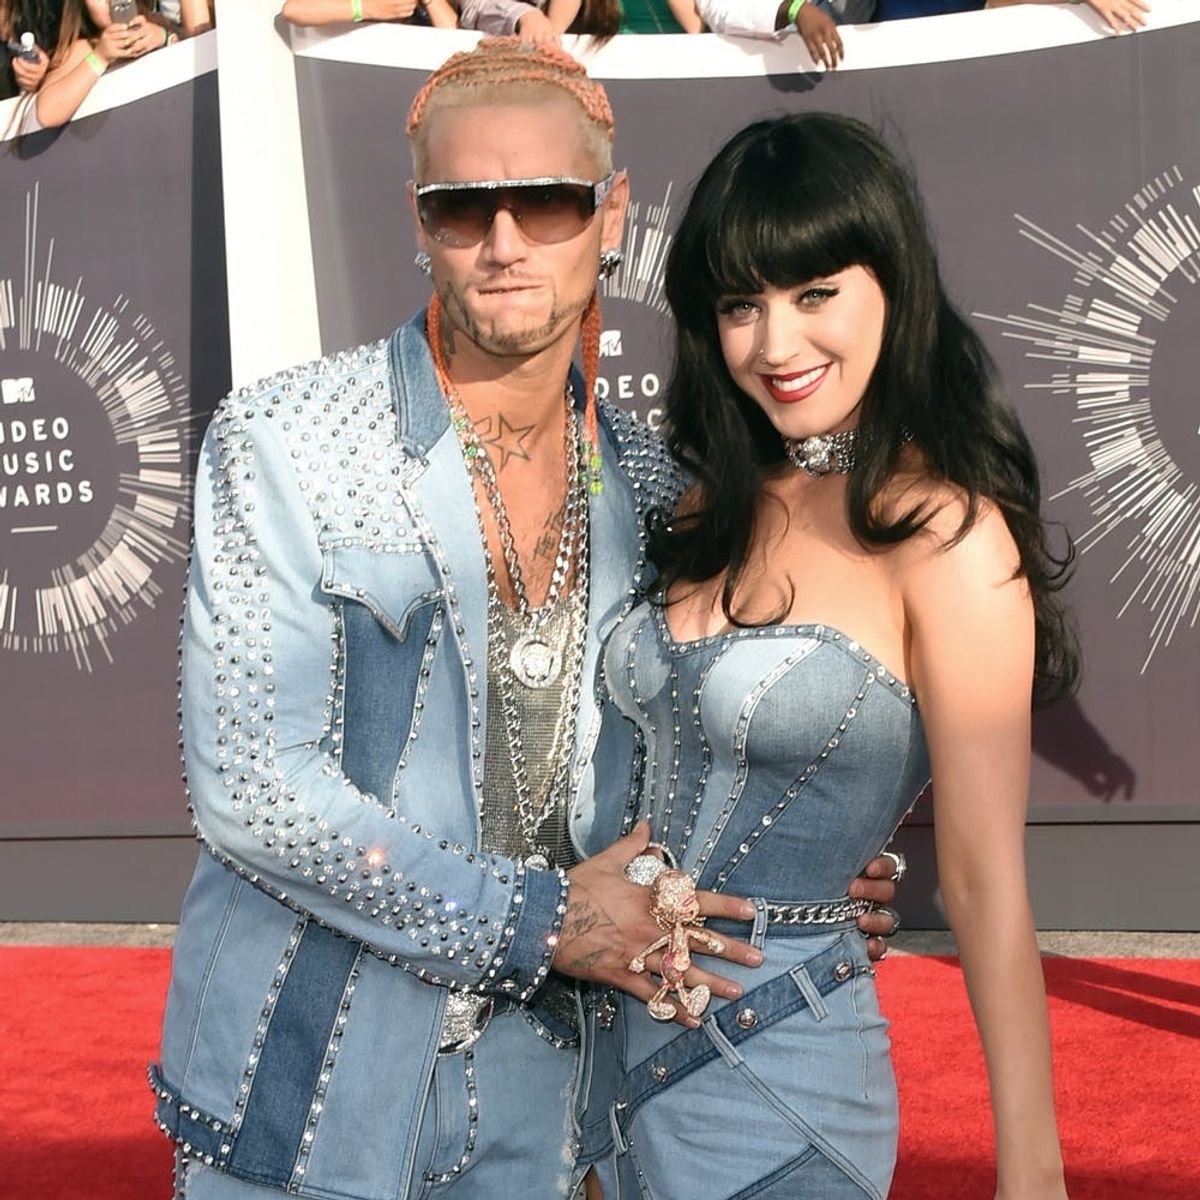 7 of the Strangest Celeb Couples to Ever Walk the MTV VMA Red Carpet